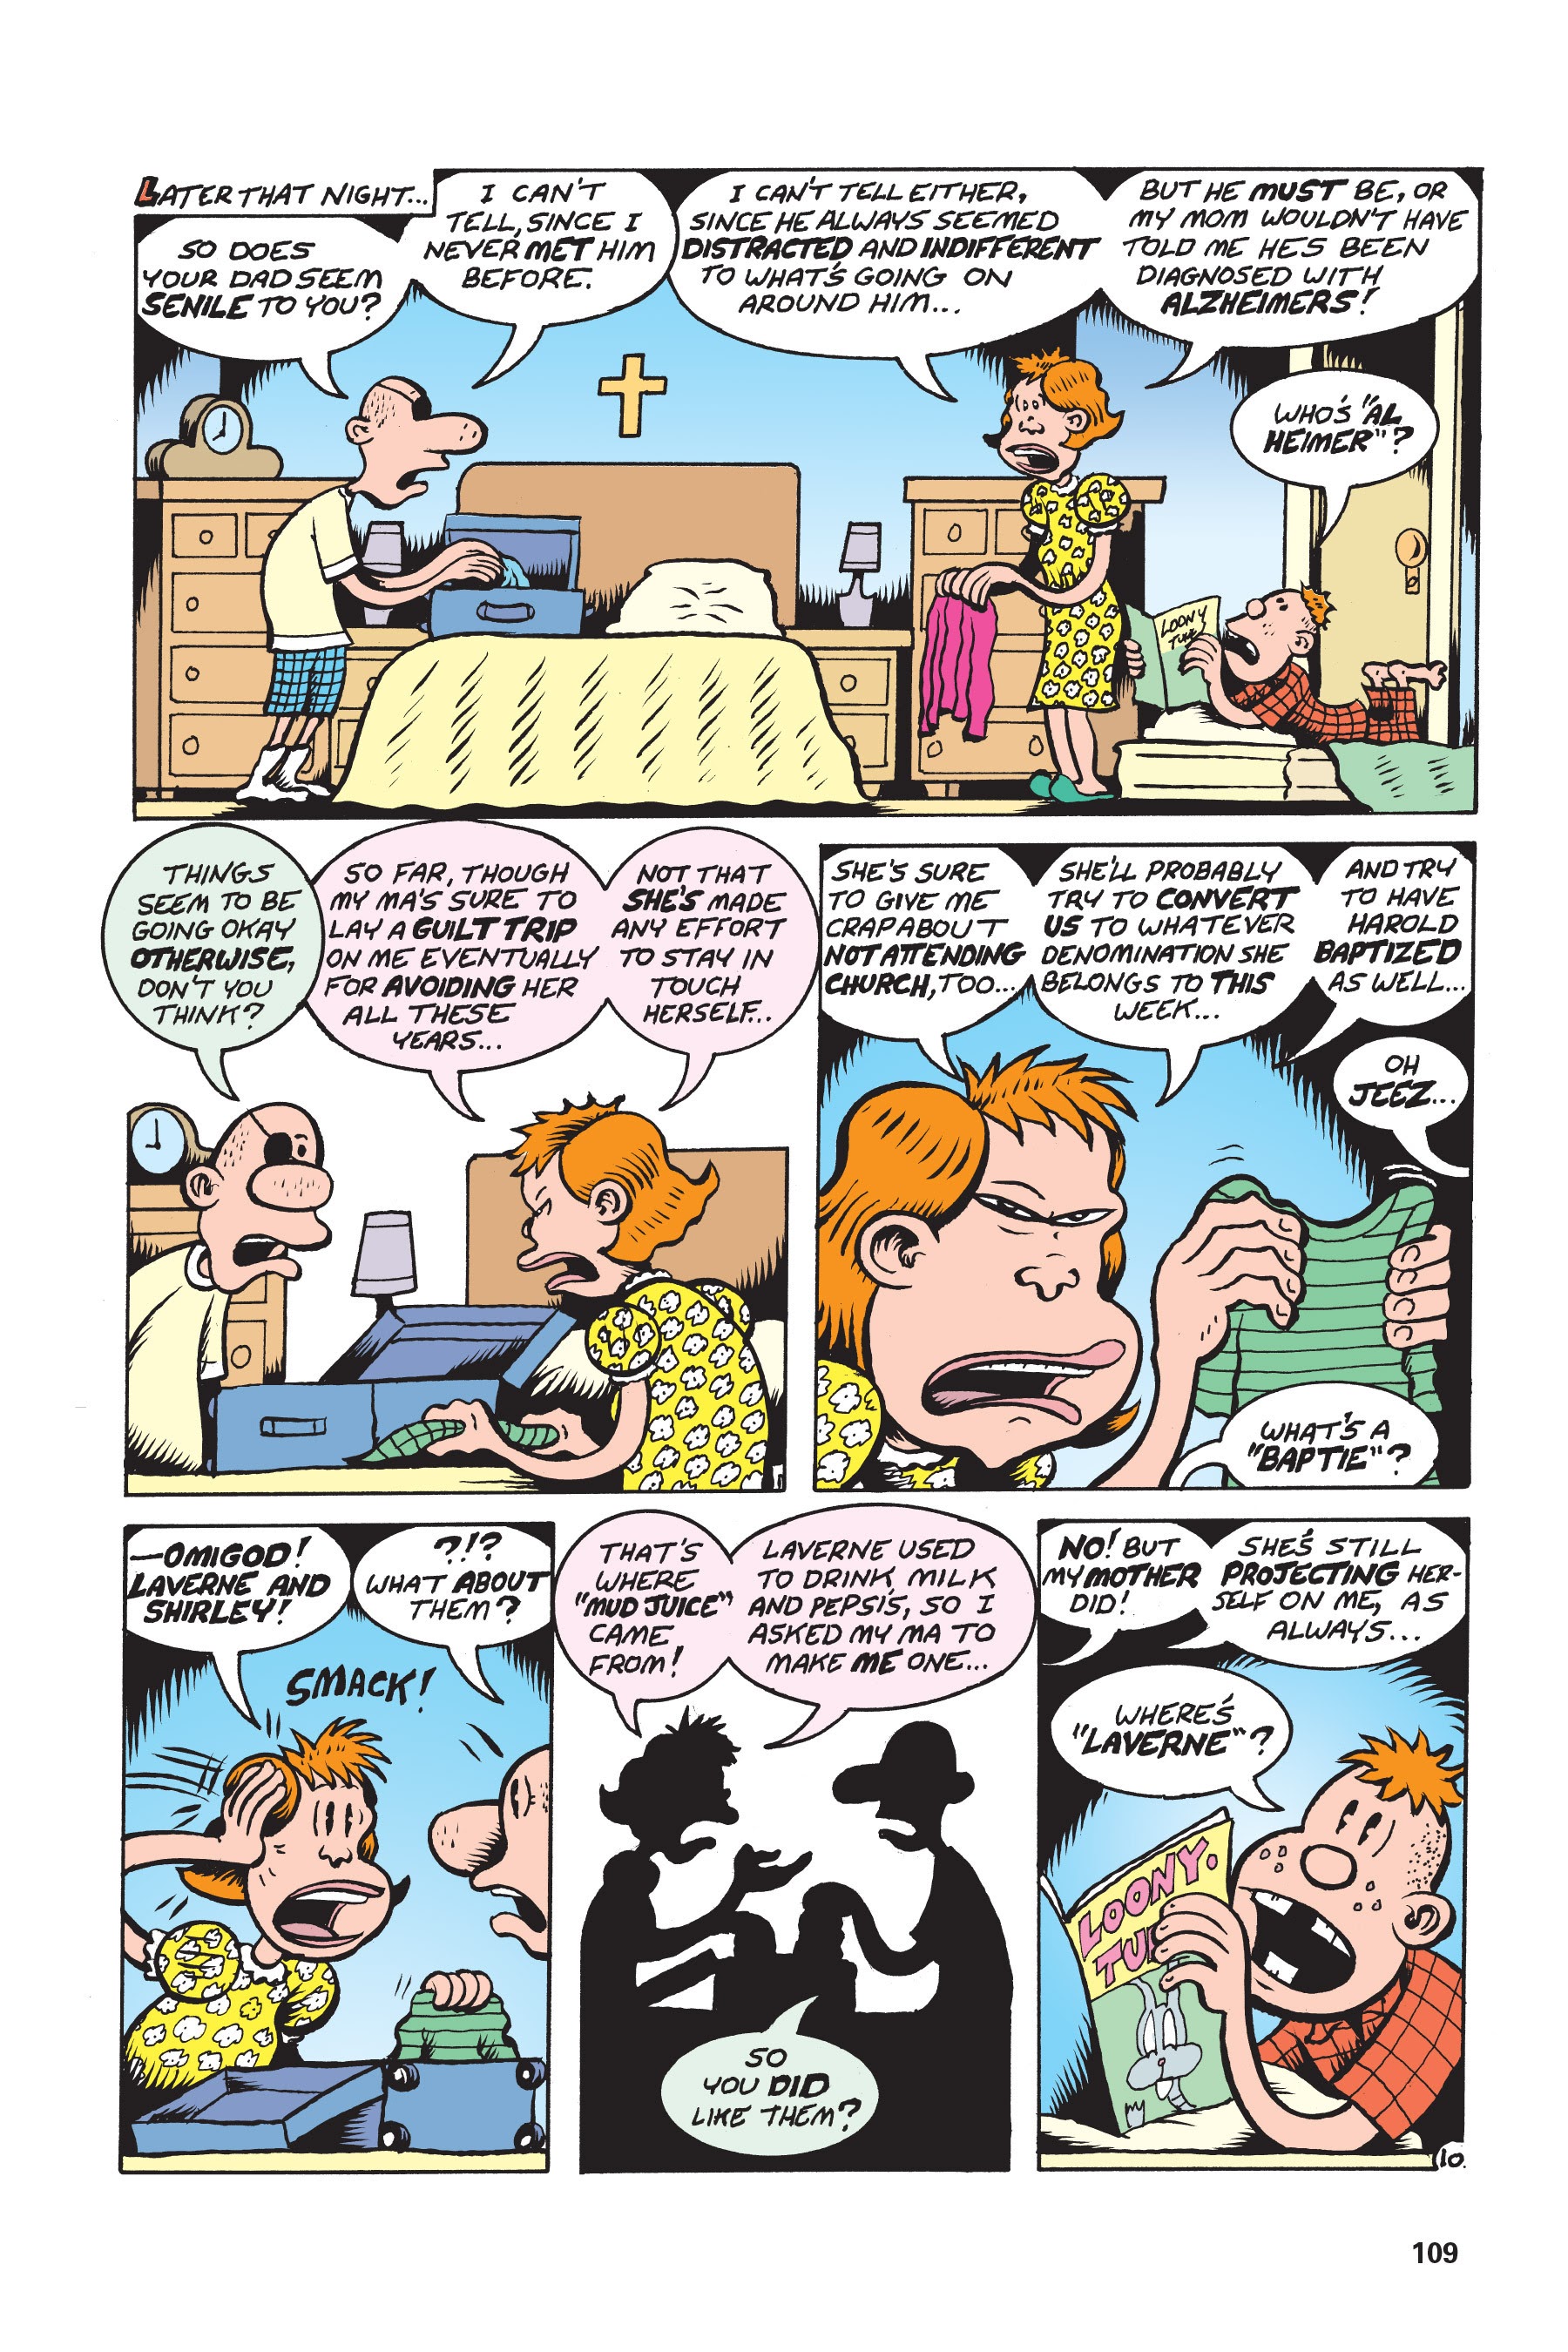 Read online Buddy Buys a Dump comic -  Issue # TPB - 109